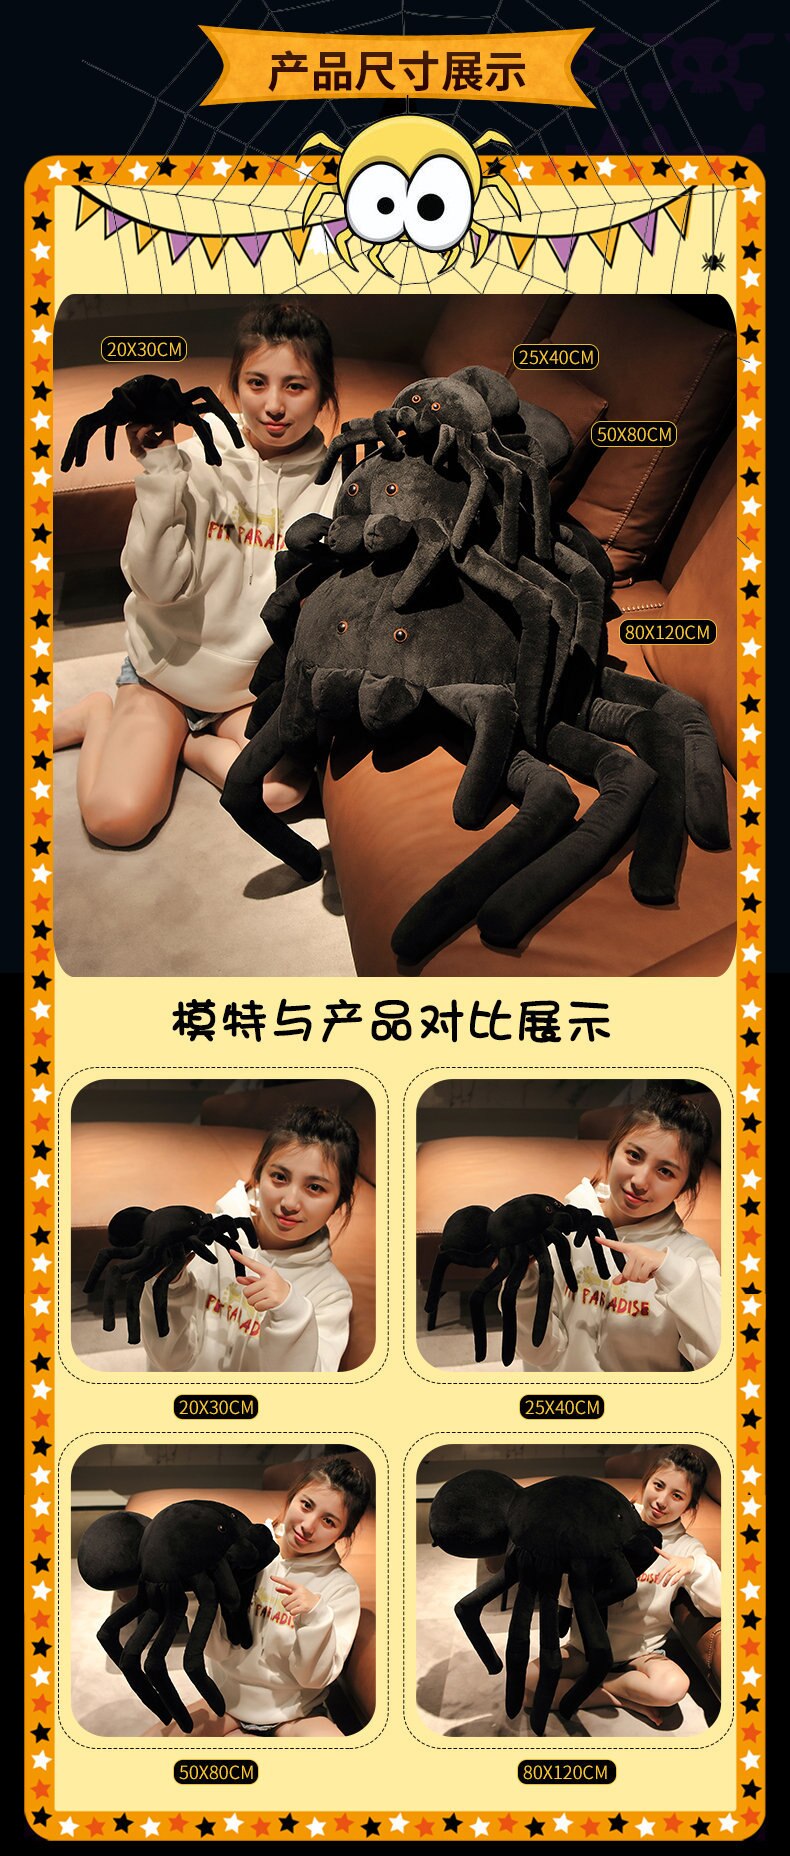 30/40/80/120cm Creative Black Spider Plush Dolls Whimsy Plush Toy Cushion Stuffed Pillow Girl and Kids Gift Toy